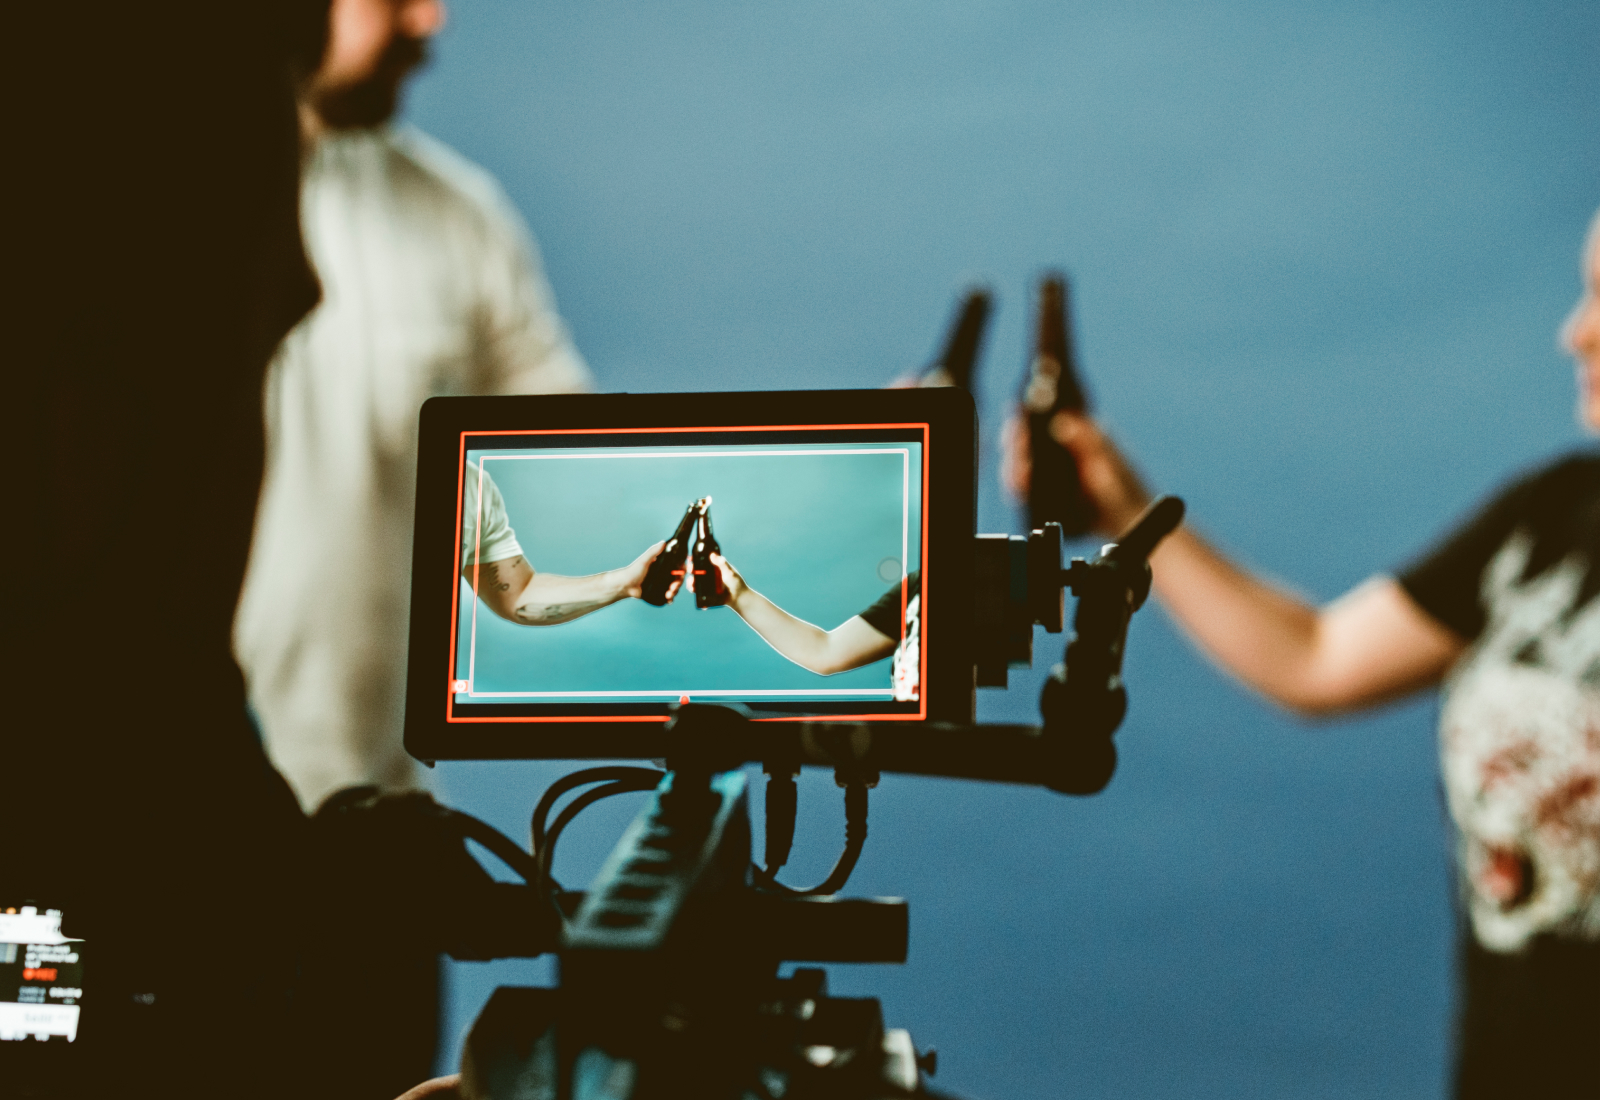 Behind the Scene Photo - Cheers-ing beers | Bland Creative | Brand Identity by Joey Carty at MRC